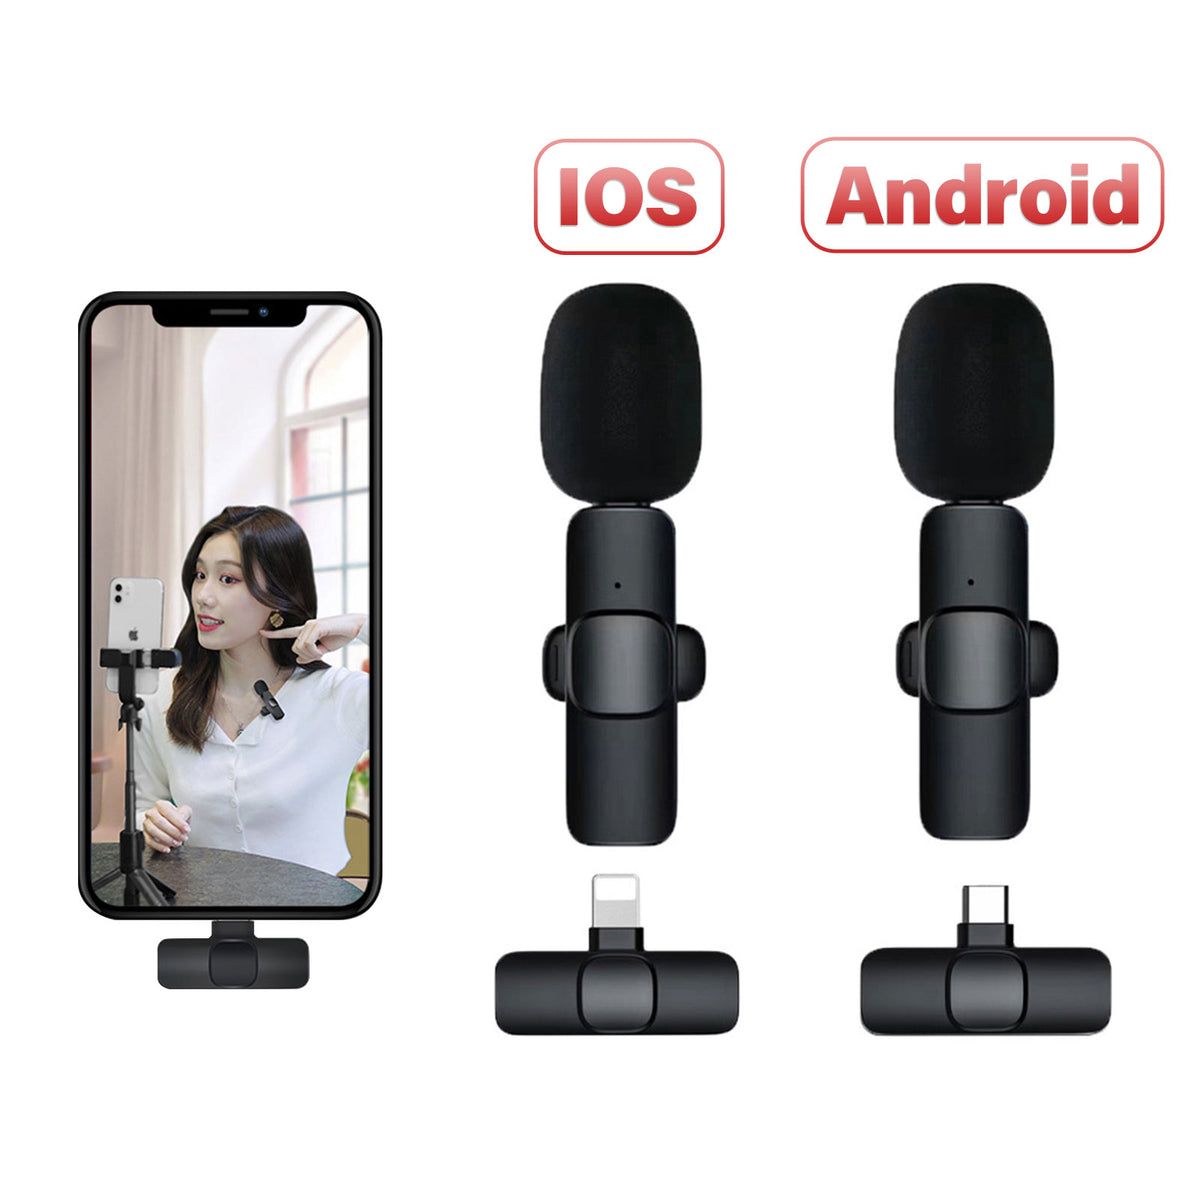 K11 2 In 1 Collar Wireless Microphone Iphone/Android & Type C Supported